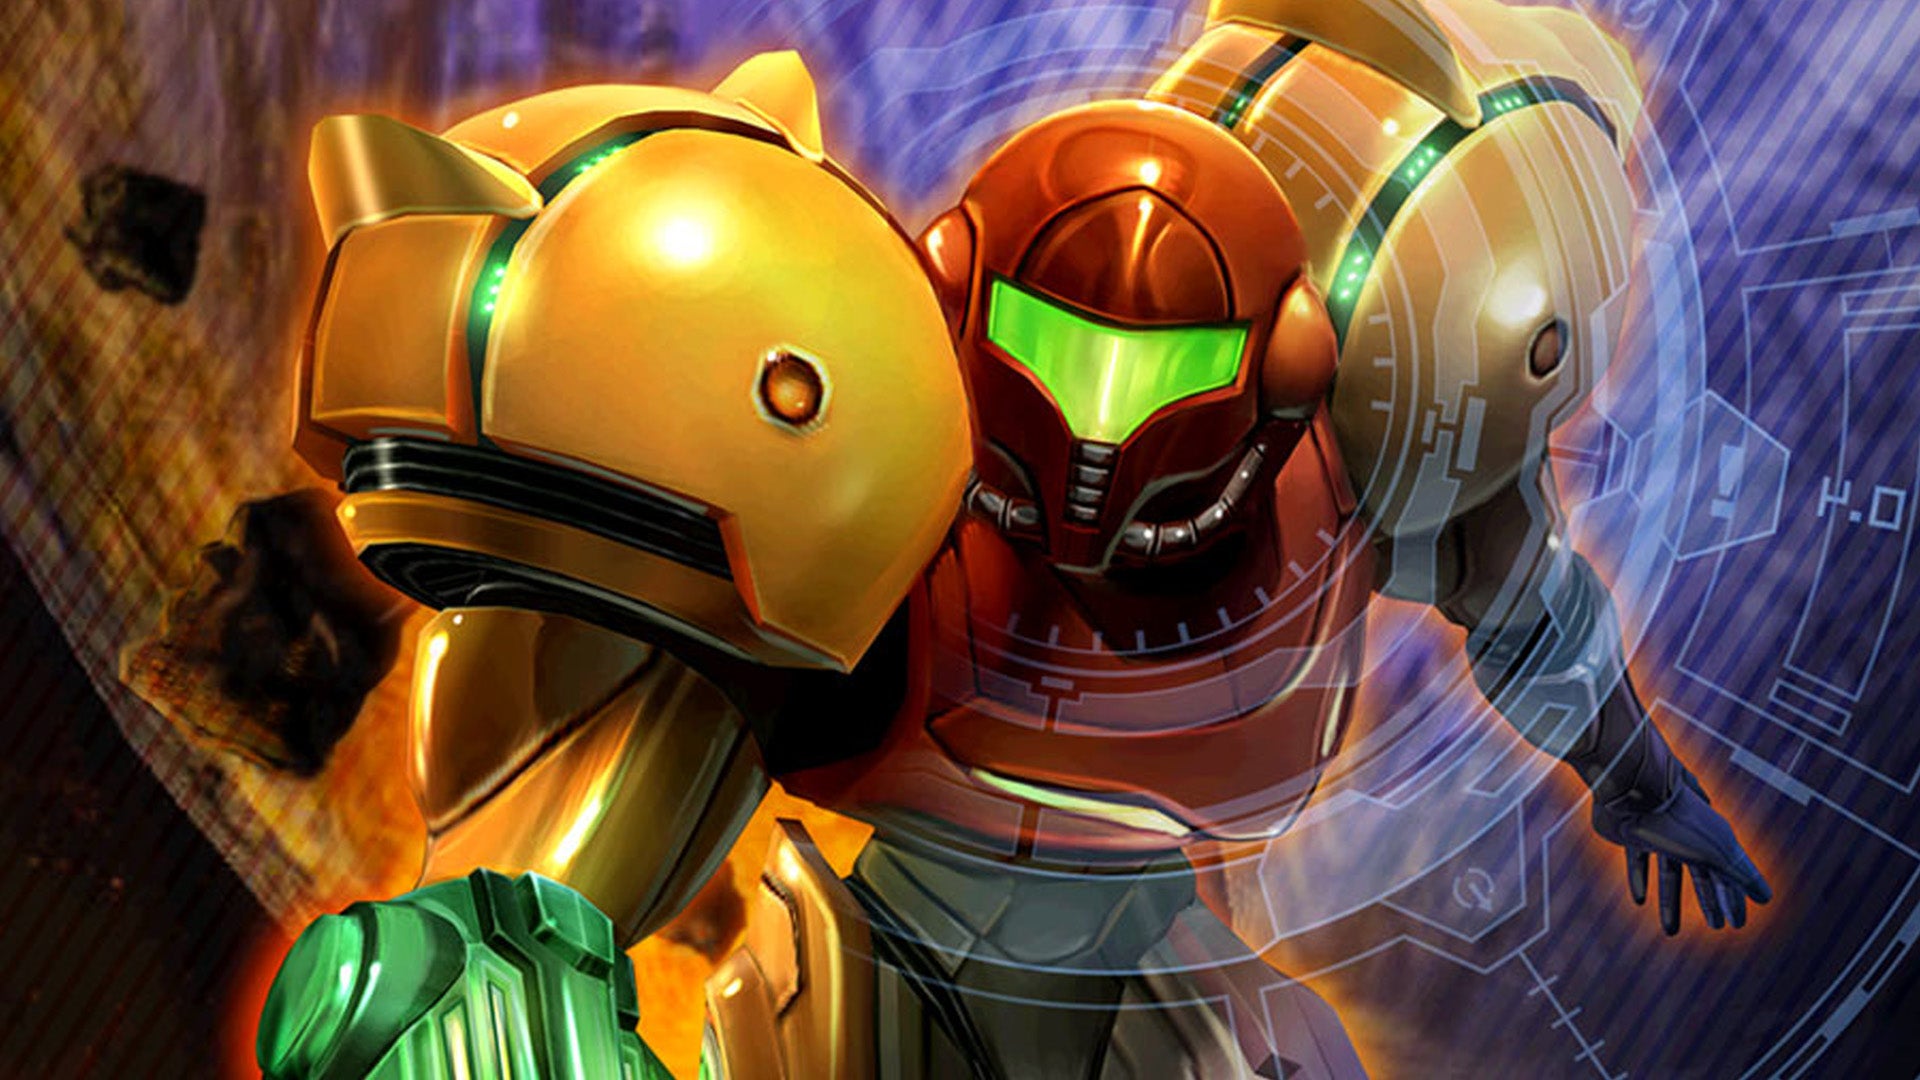 Metroid Prime dev shares some cool behind the scenes secrets ahead of the game’s 20th anniversary